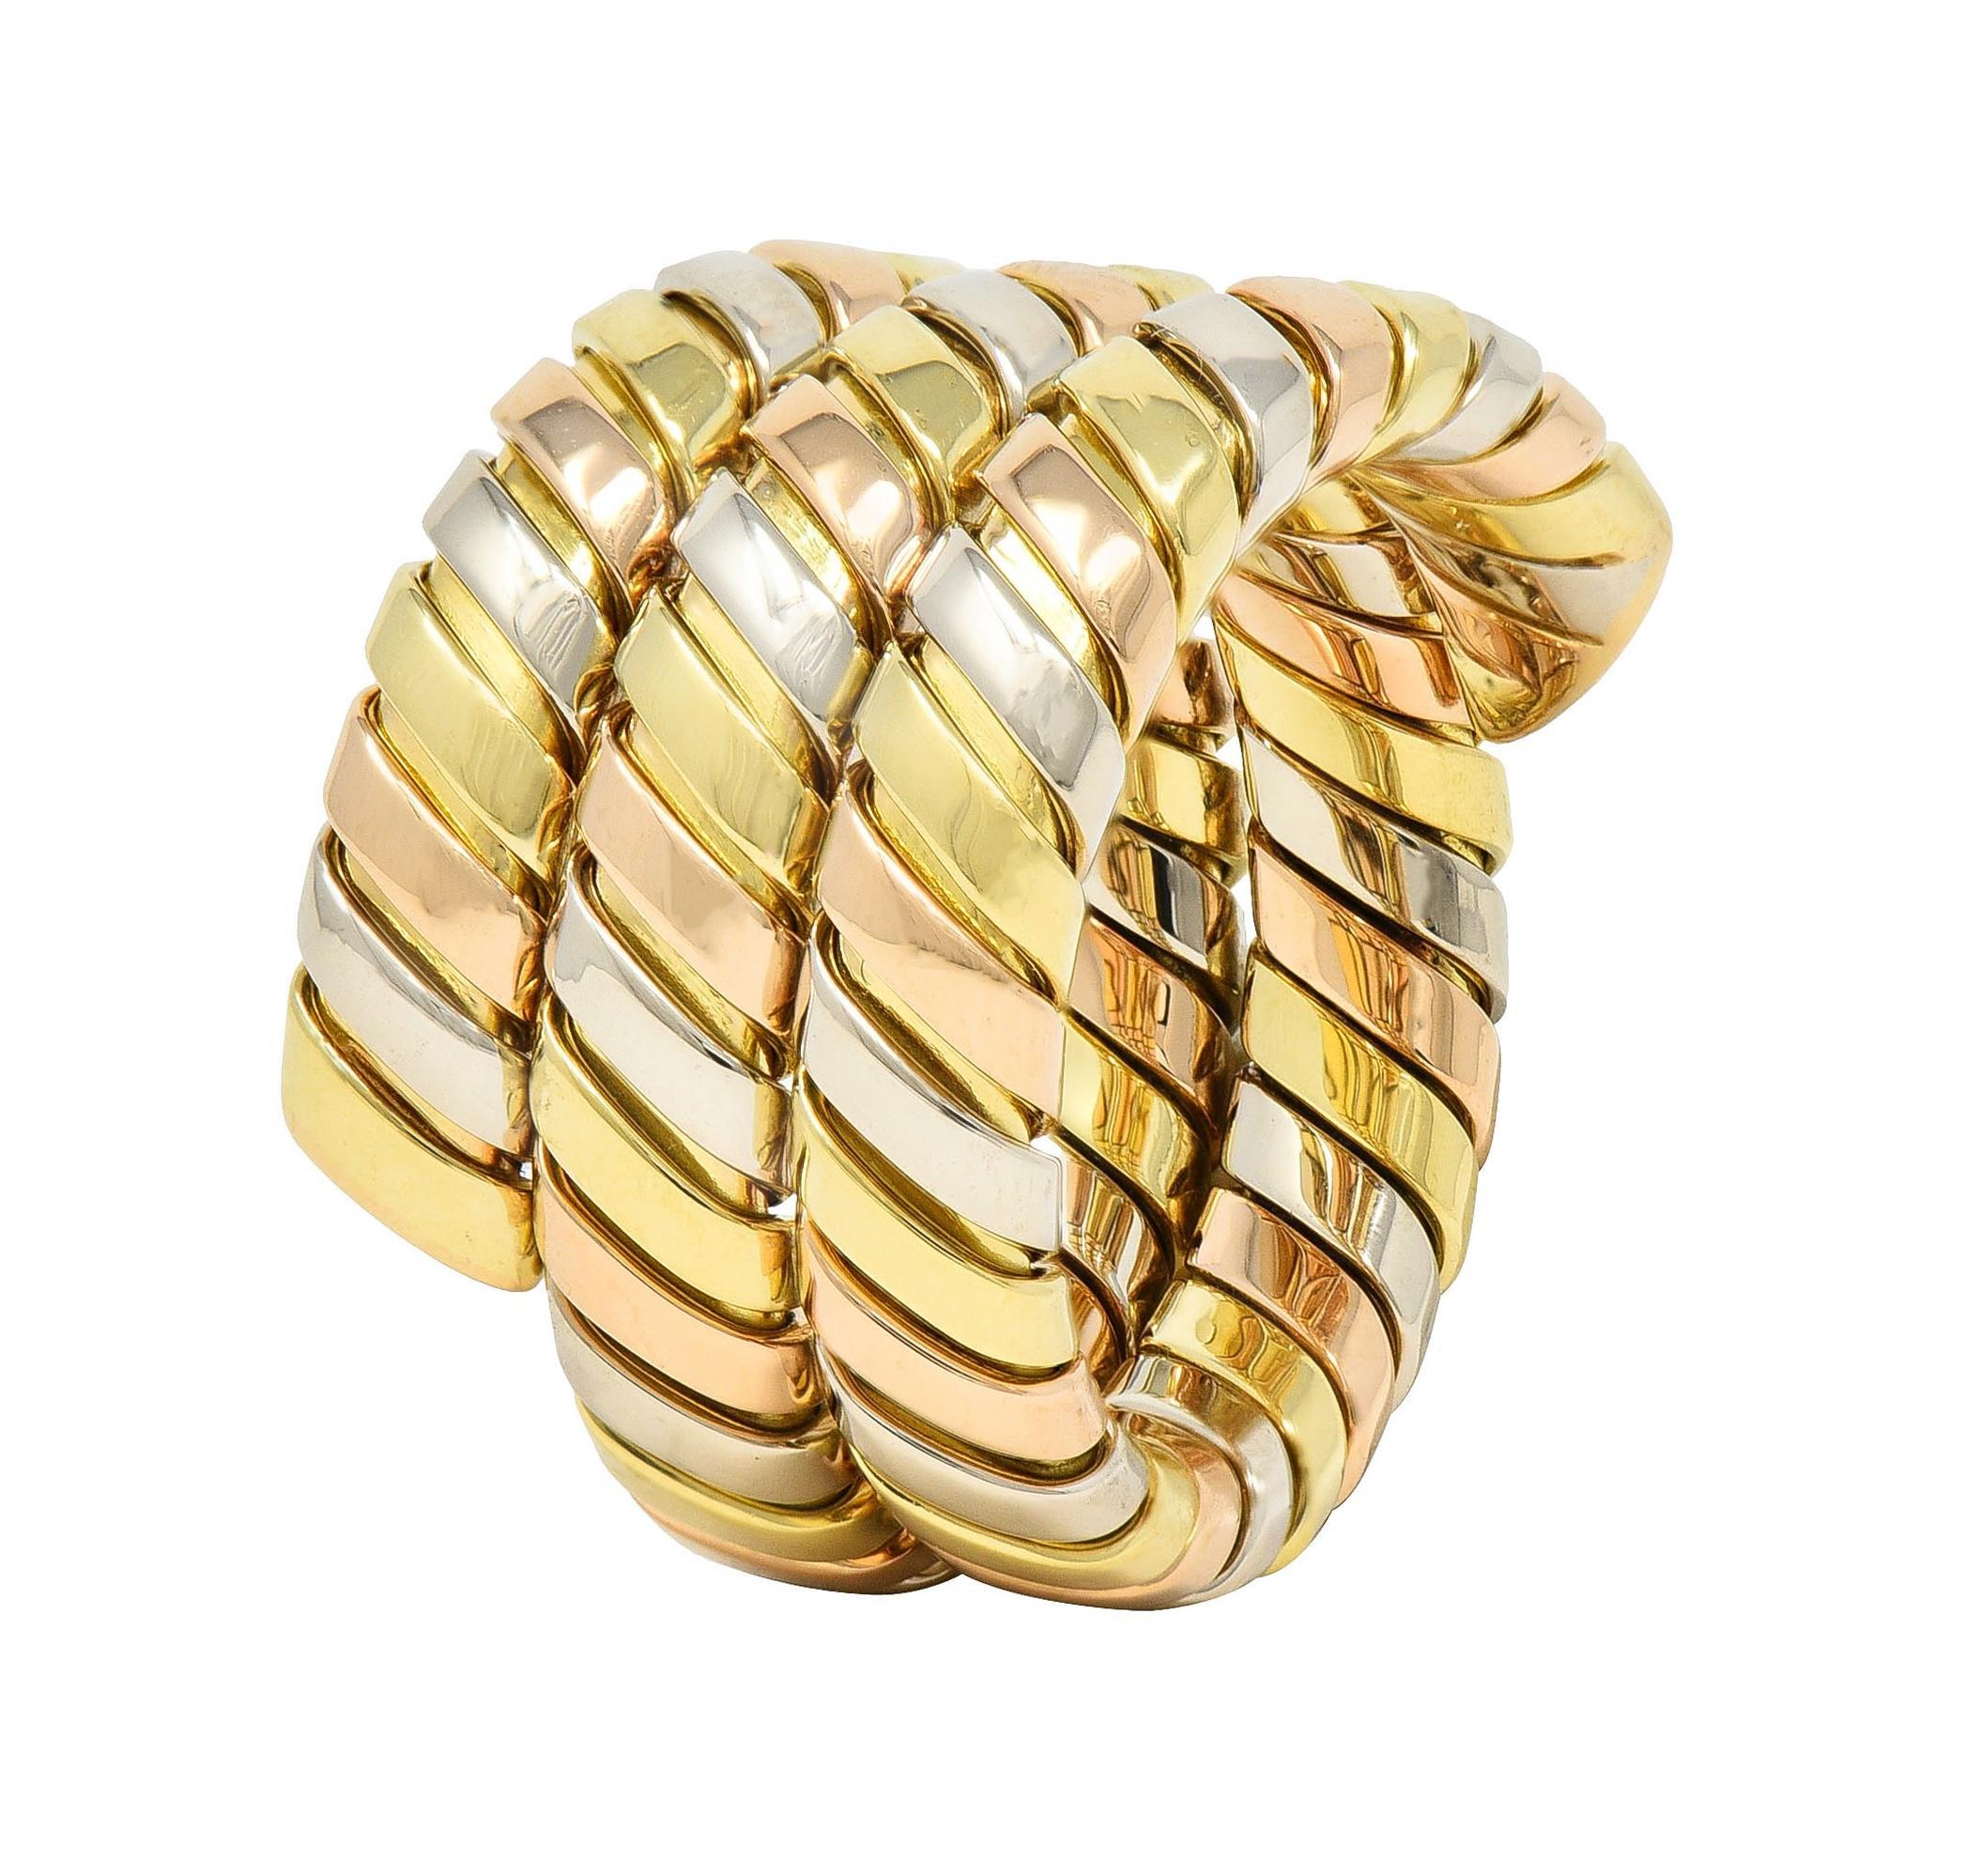 Designed as a triple wrap style ring comprised of segmented tubogas
High polished rose, white, and yellow gold
With considerable flex
Stamped with Italian assay marks for 18 karat gold
Numbered and fully signed for Bvlgari
Circa: 1990s
Ring size: 7